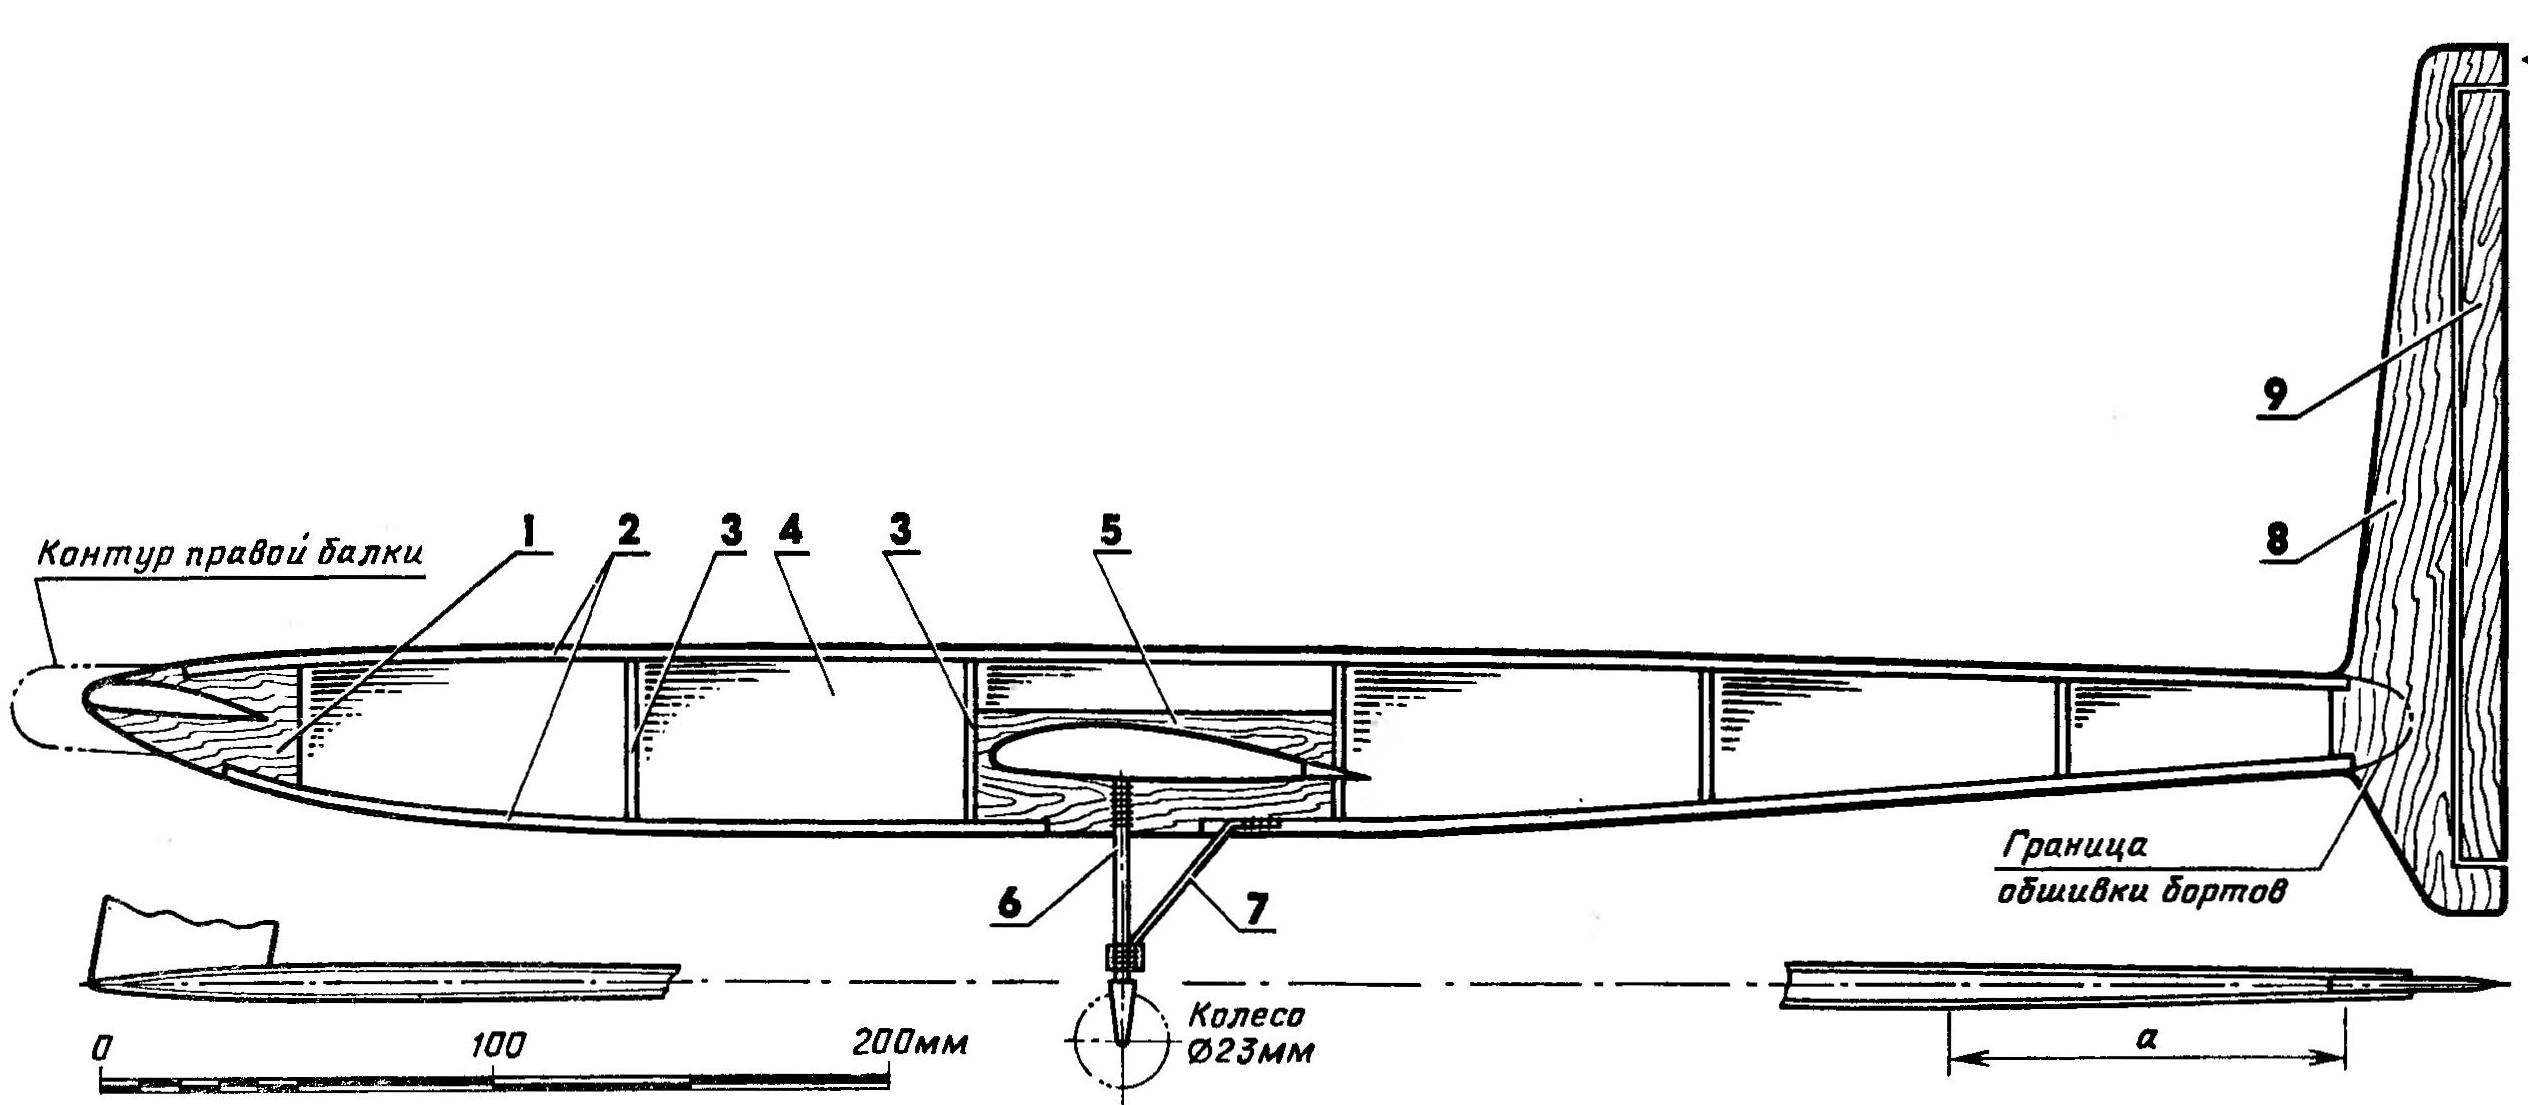 The left beam of the fuselage